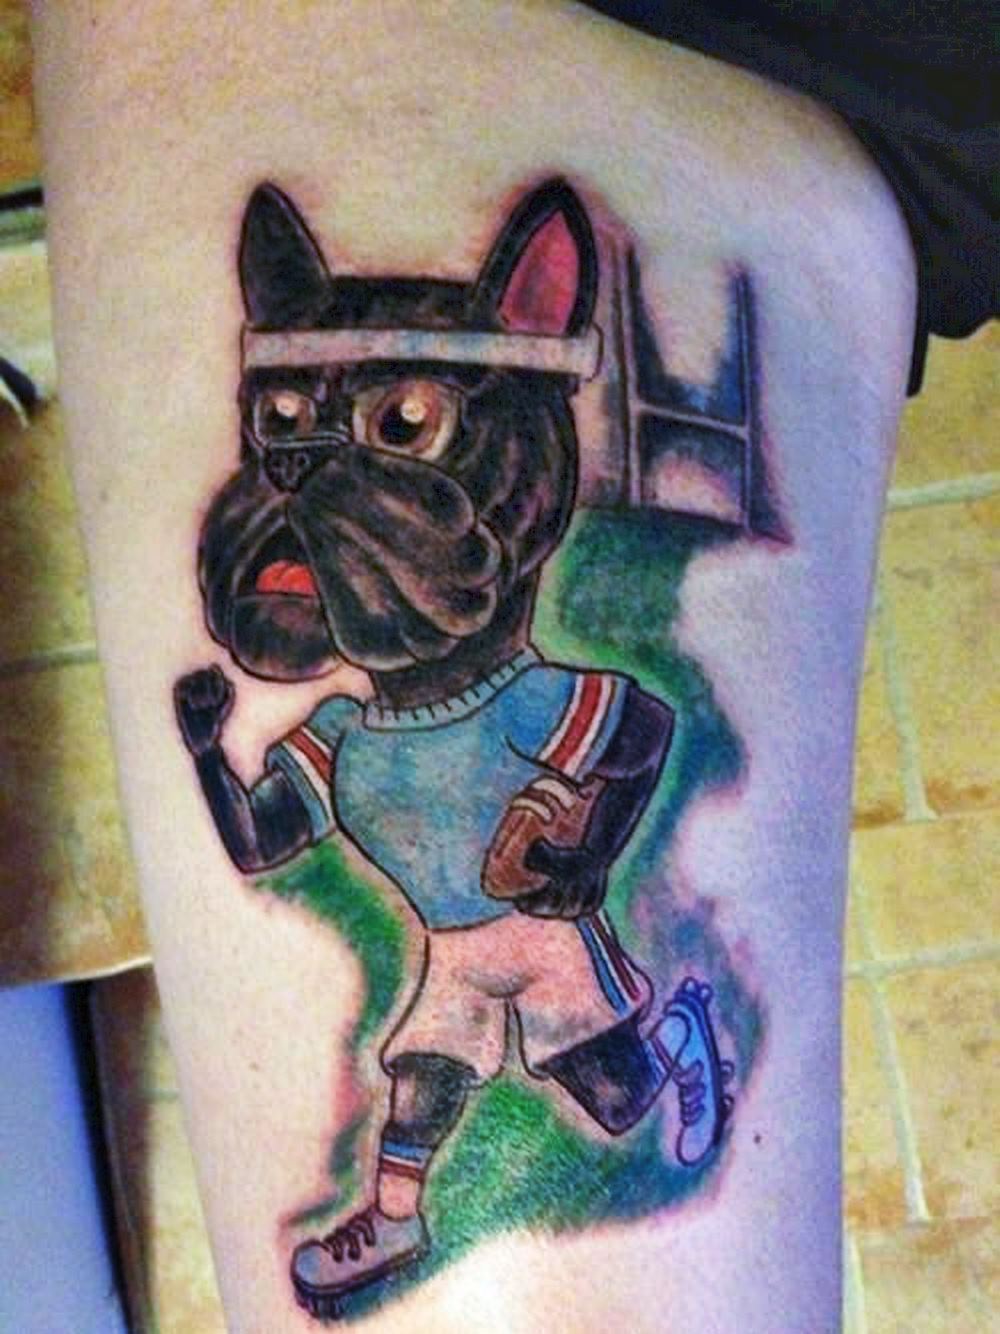 This Airbud spin-off tattoo looks strange and unappealing.